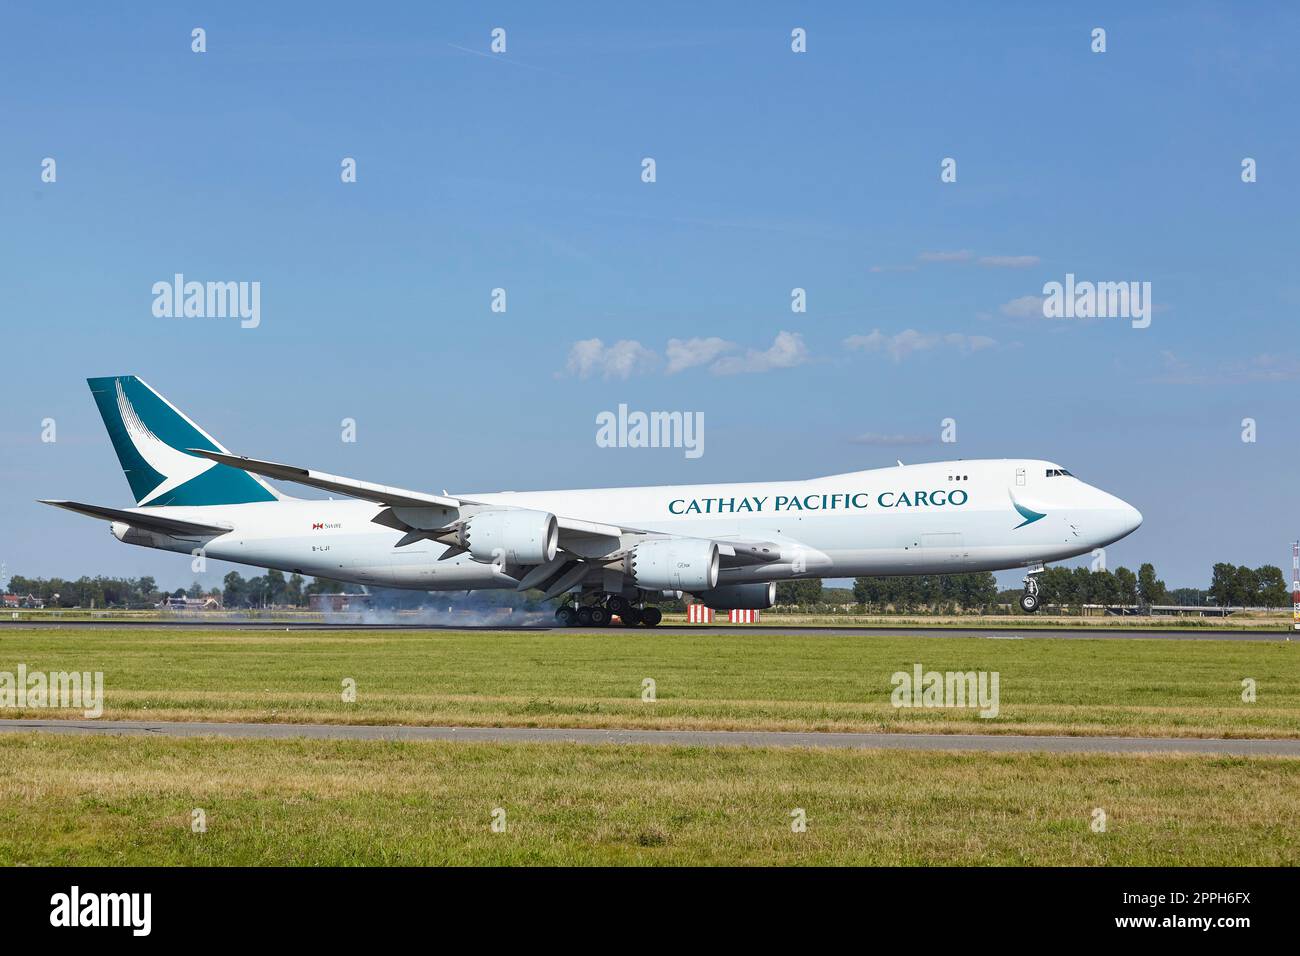 Amsterdam Airport Schiphol - Boeing 747-867F of Cathay Pacific Cargo lands Stock Photo